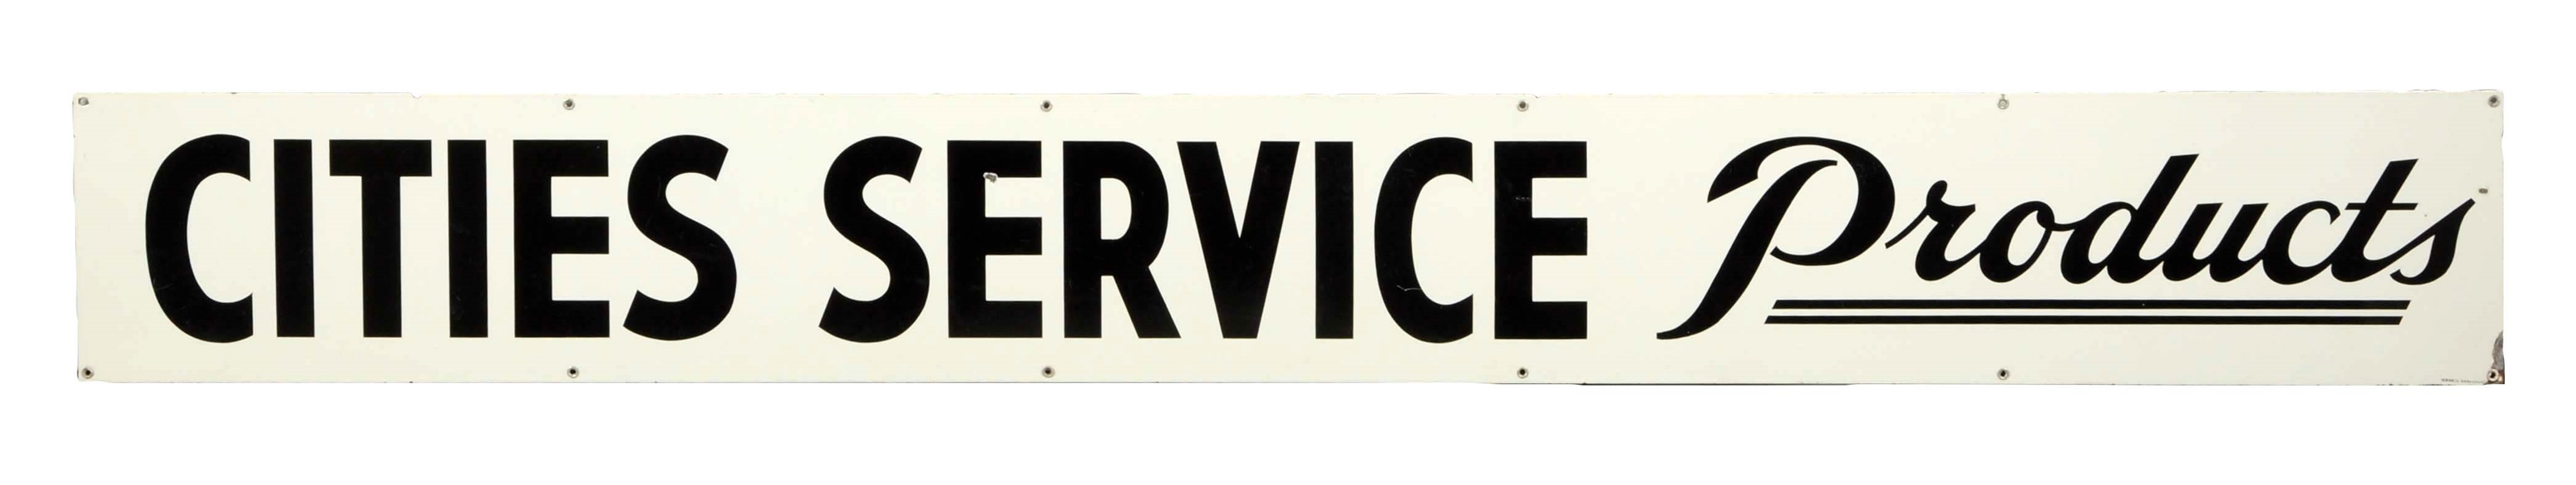 CITIES SERVICE PRODUCTS PORCELAIN SIGN.